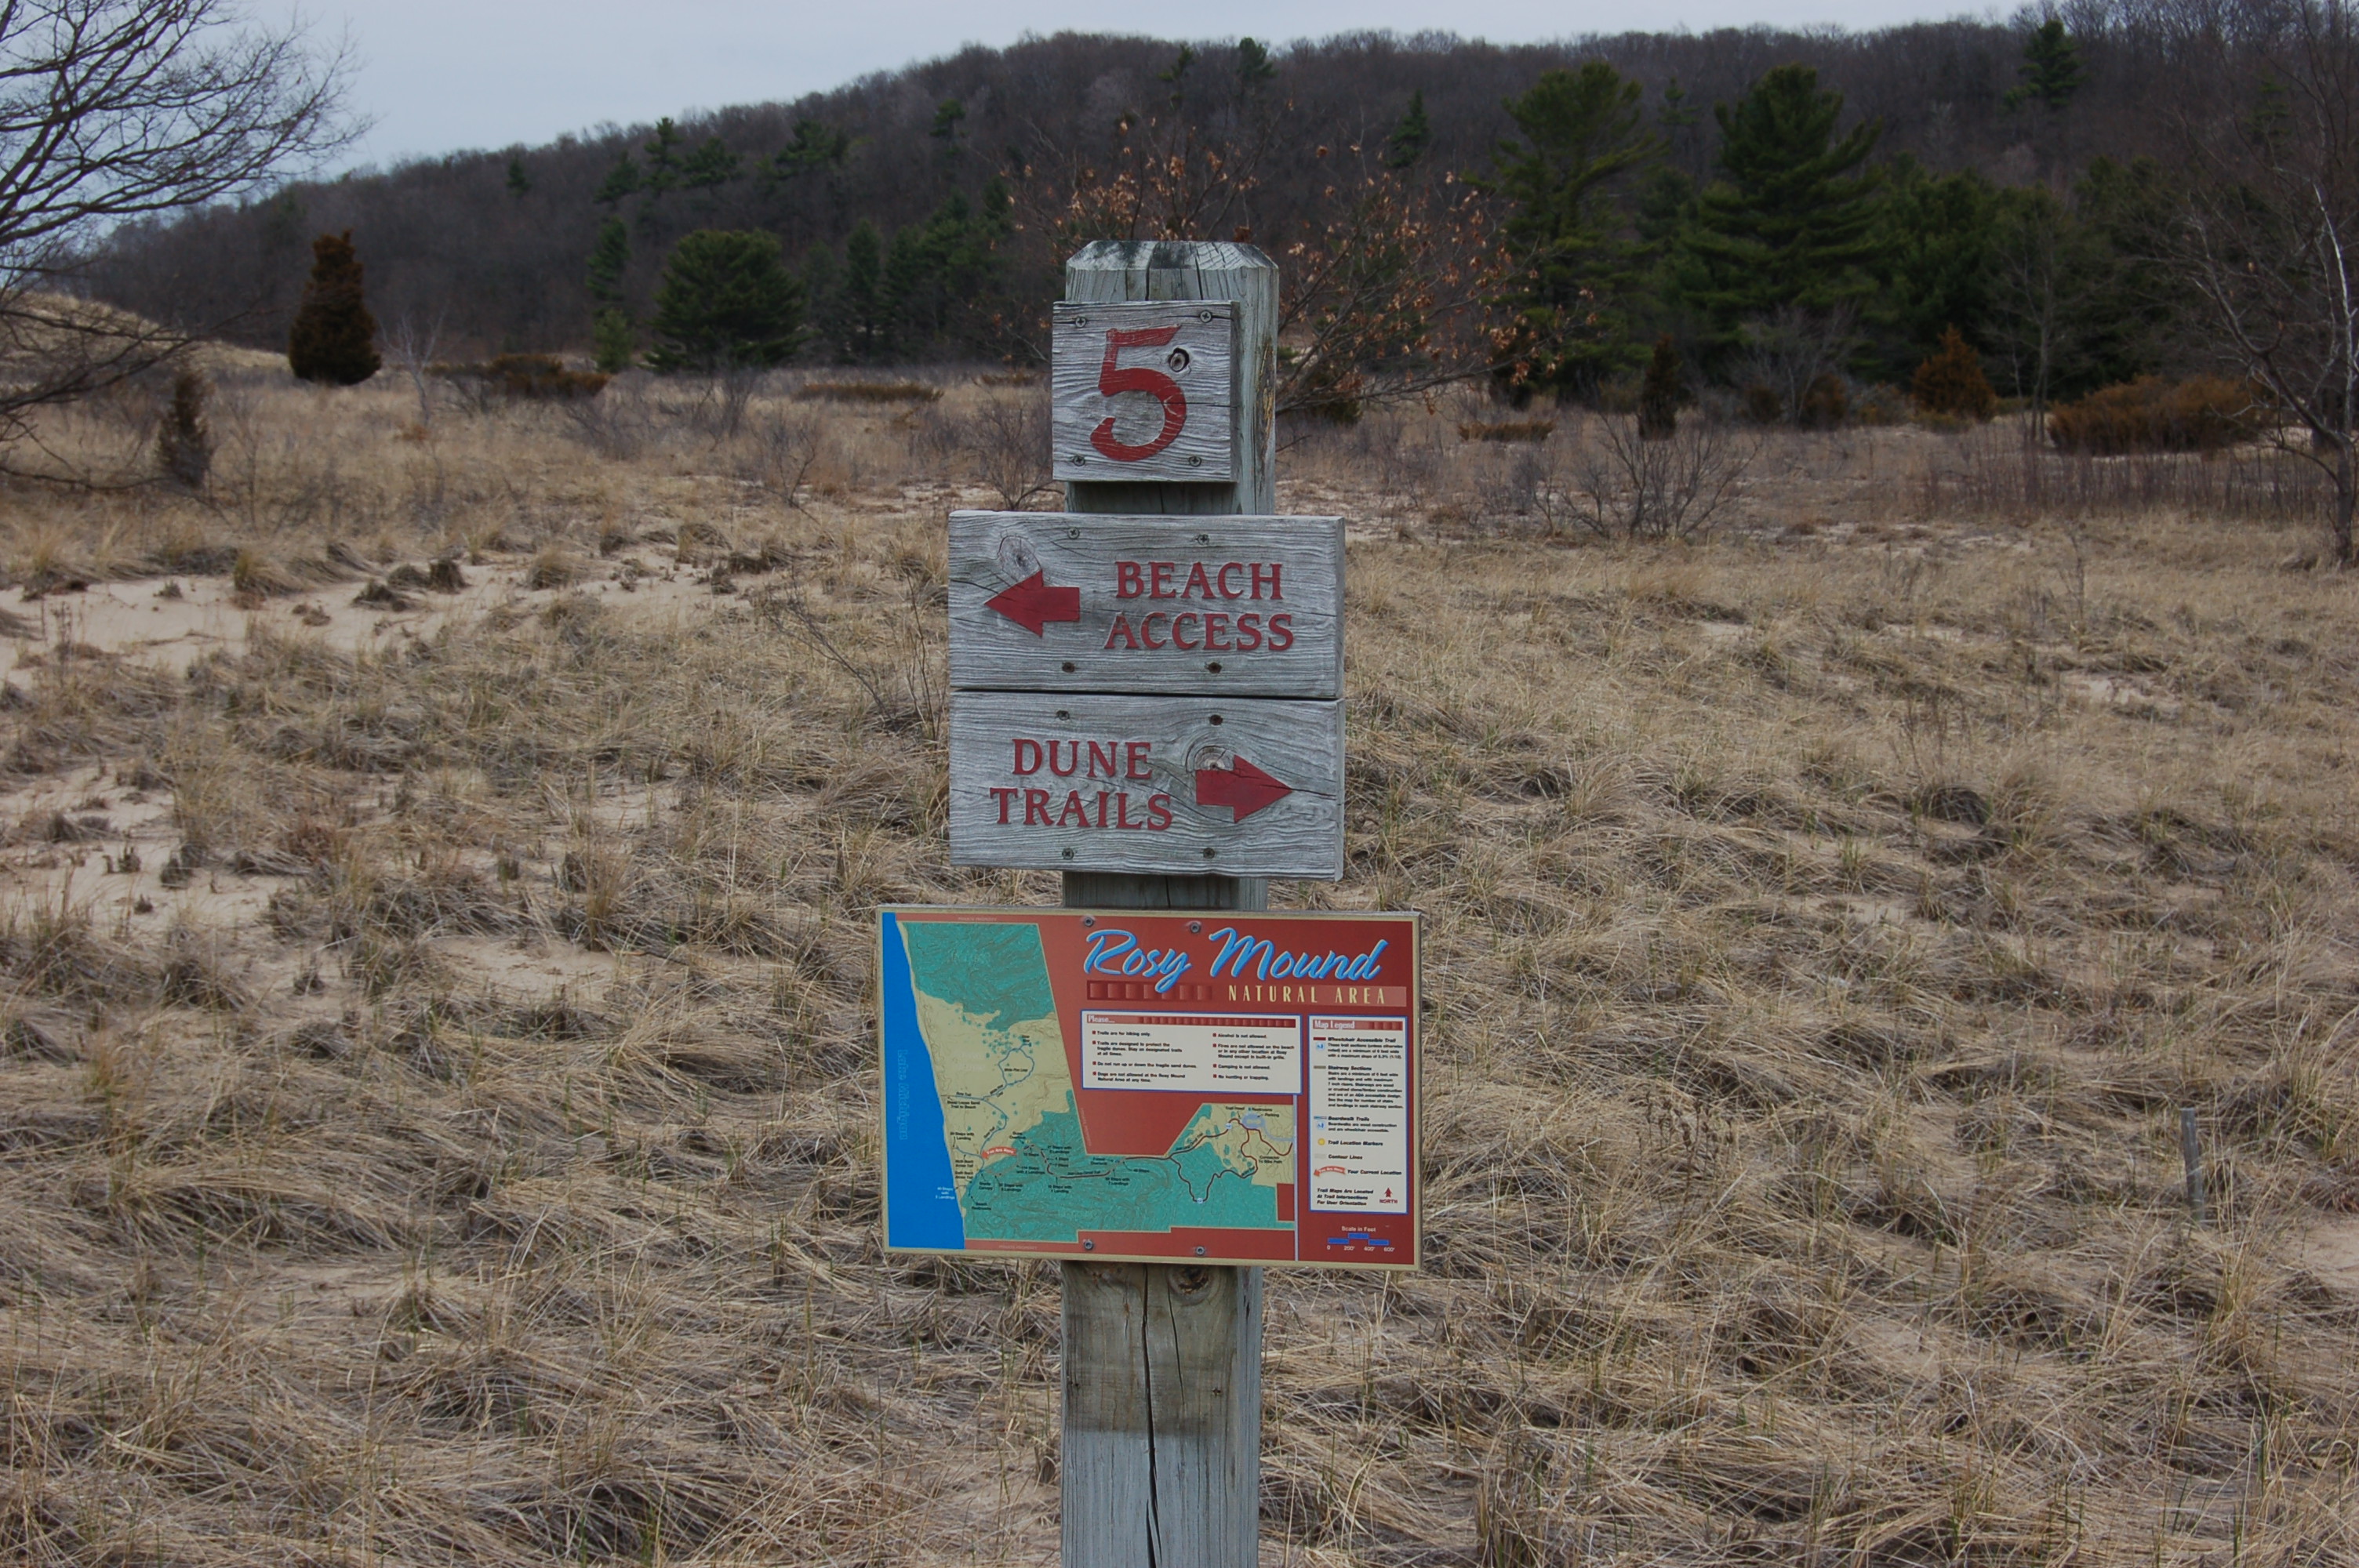 Rosy Mound Trail Signs